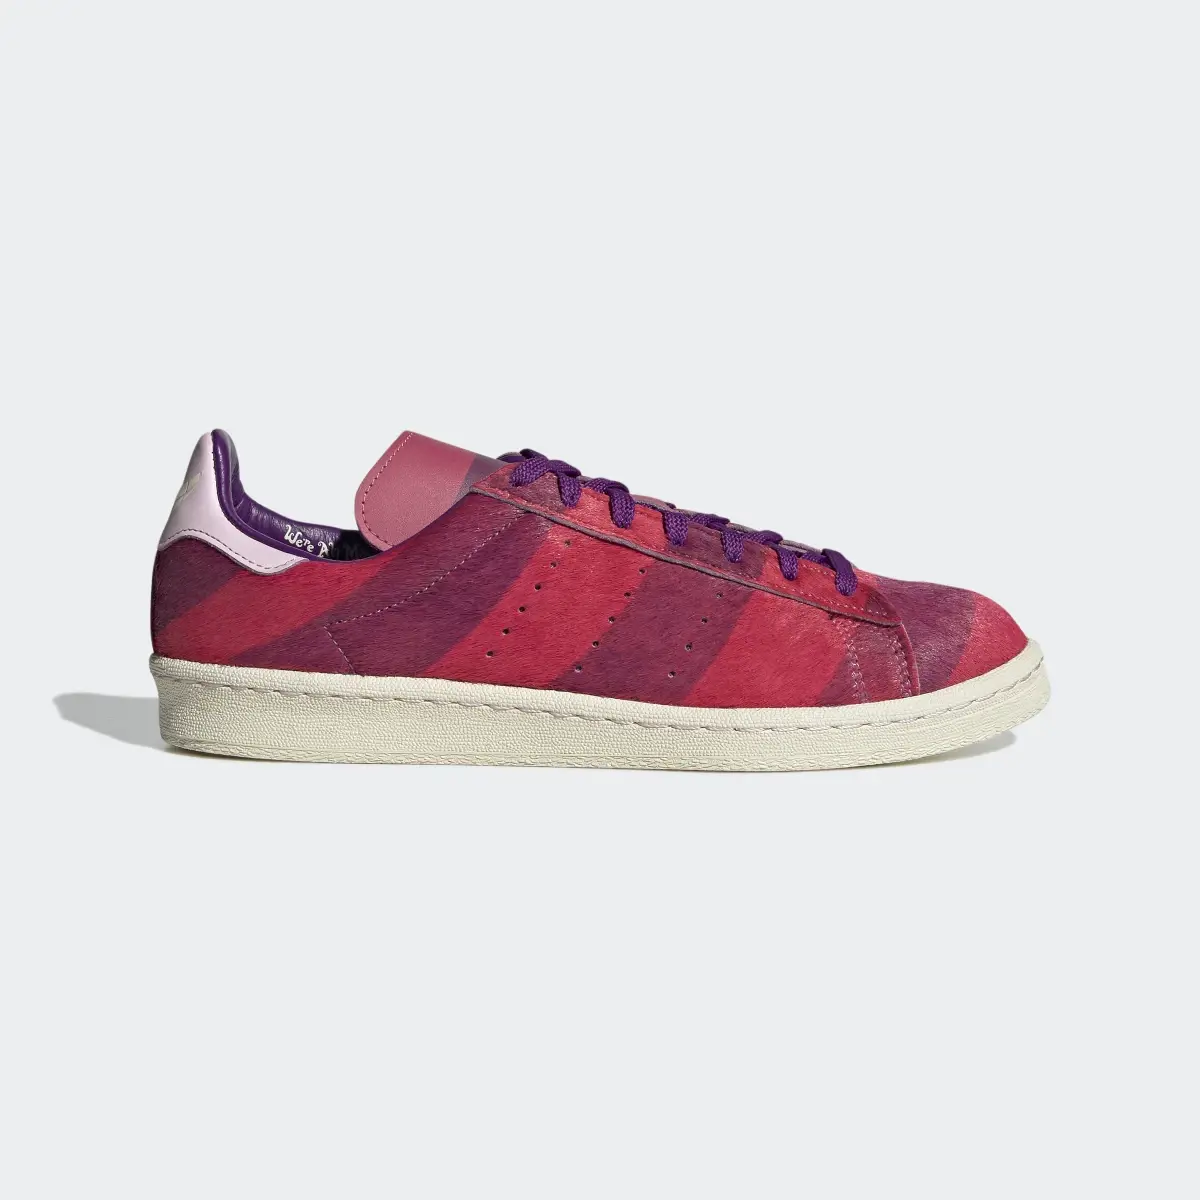 Adidas Campus 80s Cheshire Cat Shoes. 2